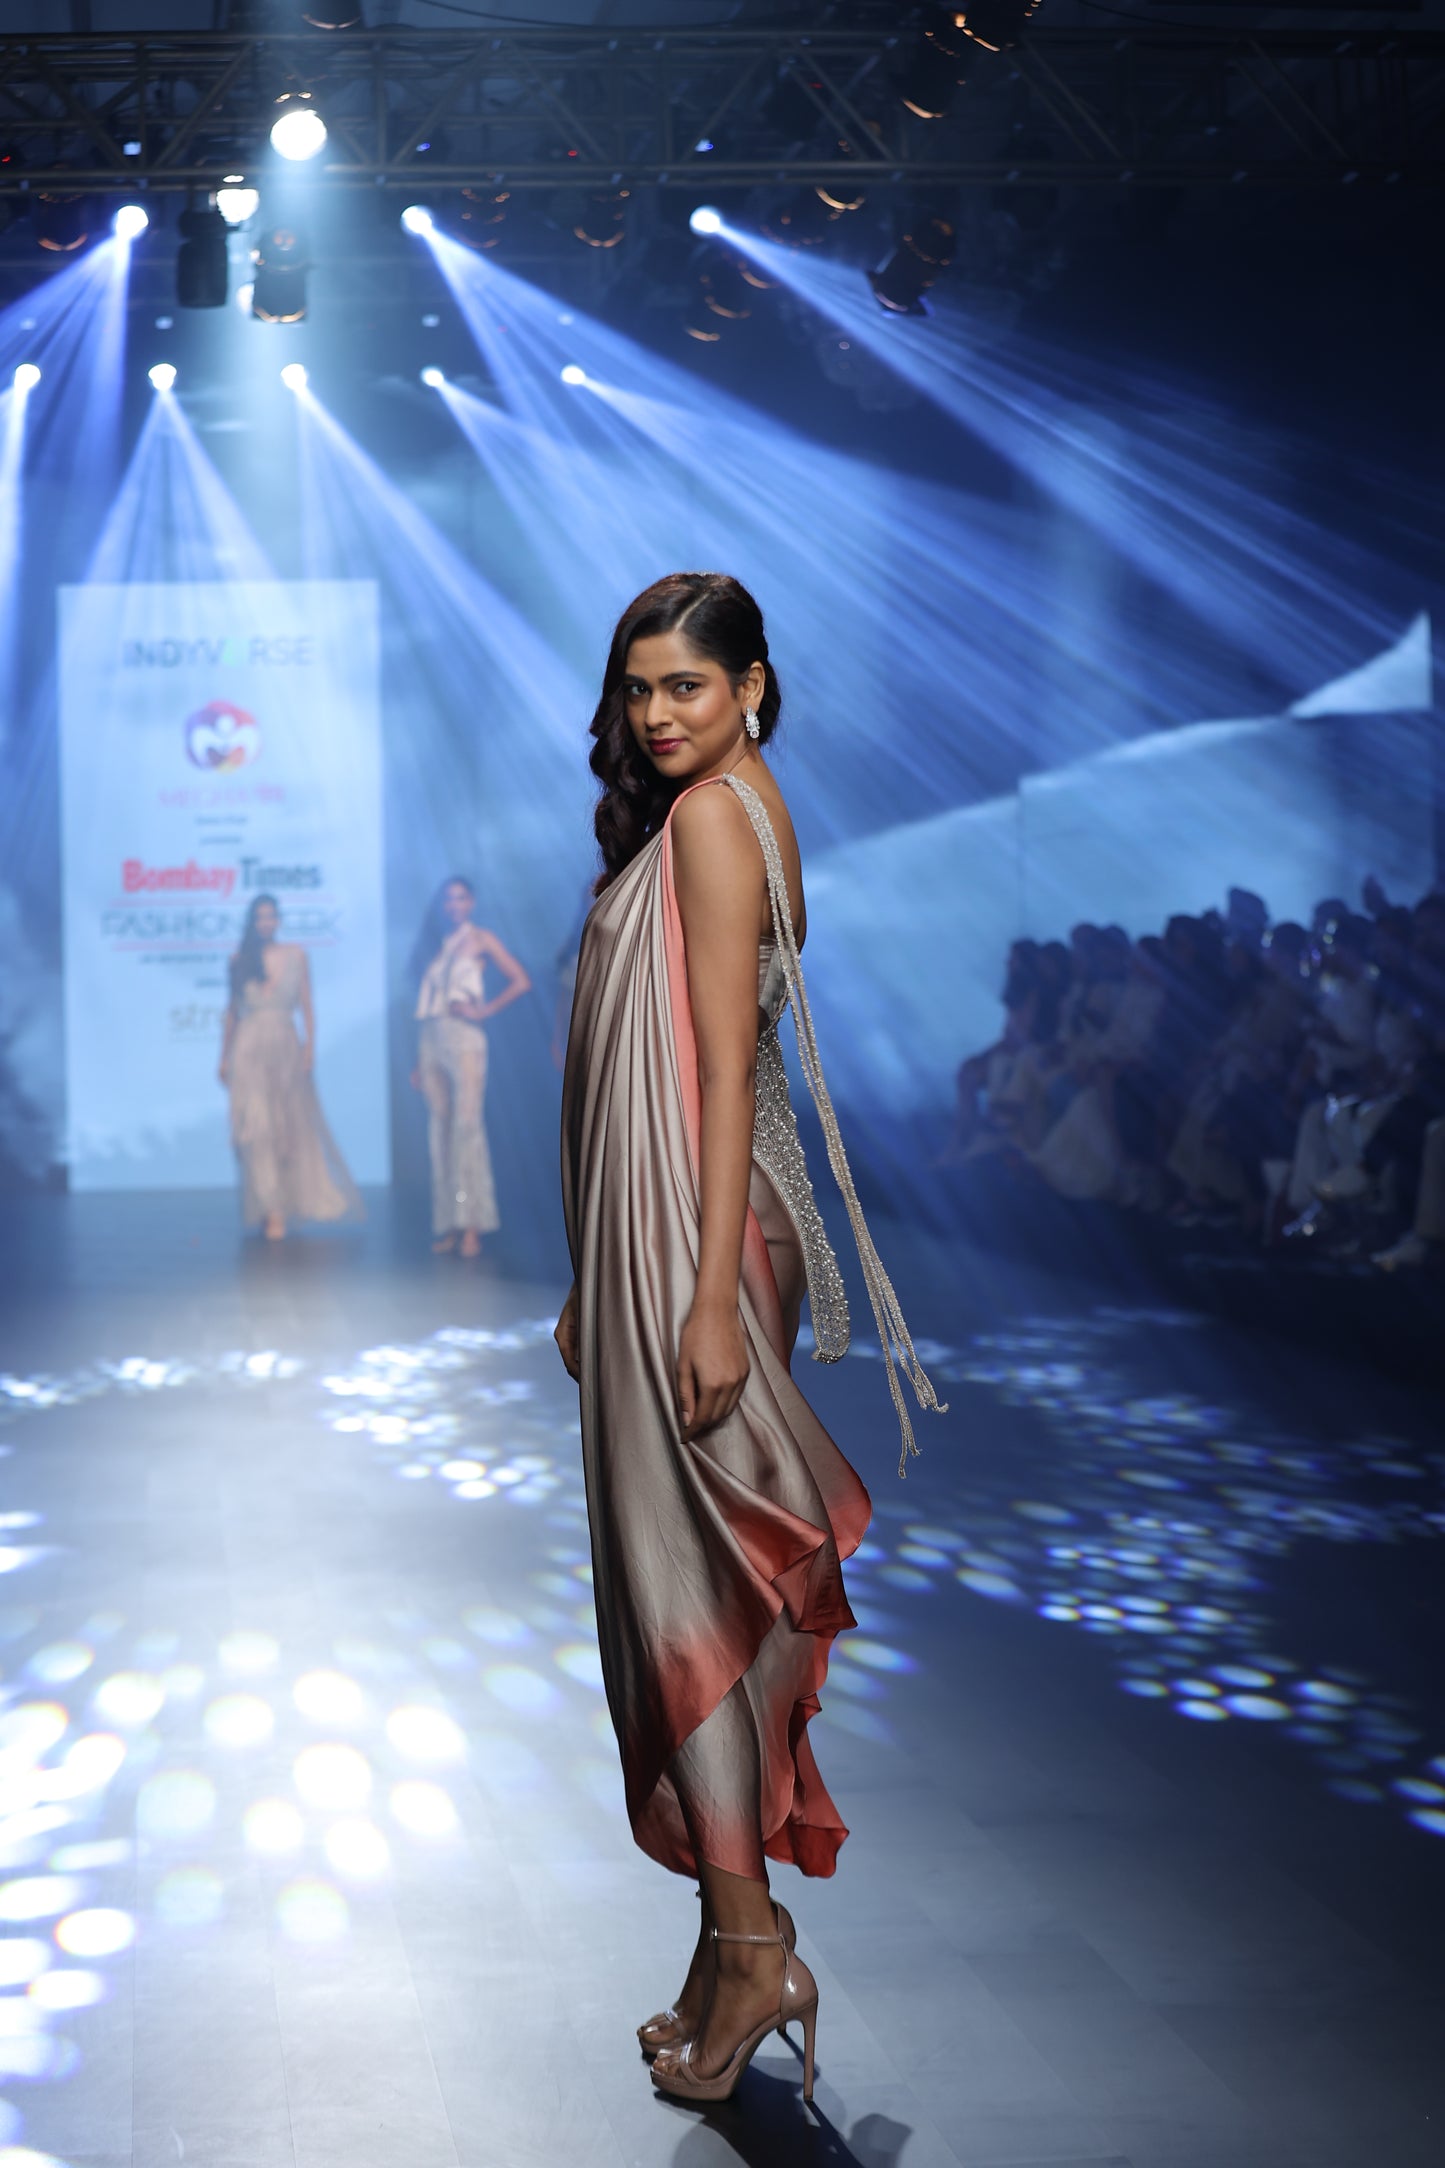 Ombre draped saree dress with a bralette and pearl detailing on mesh throw.